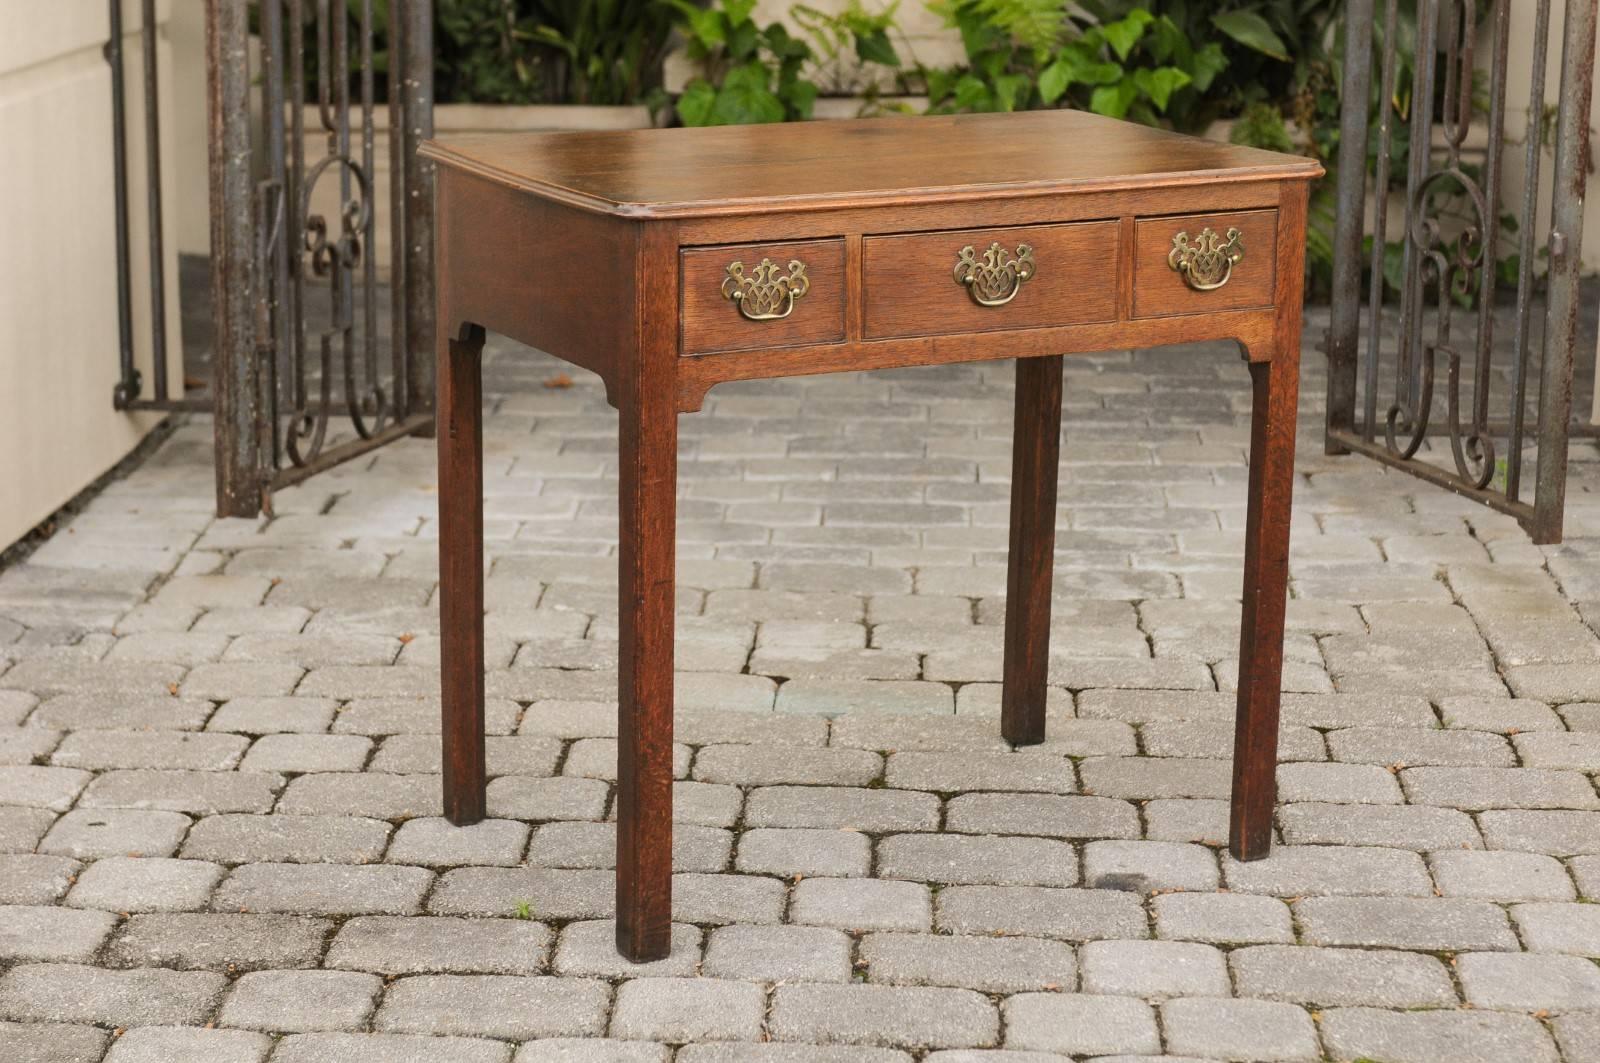 English 1780s Georgian Oak Side Table with Marlborough Legs and Chinoiserie In Good Condition For Sale In Atlanta, GA